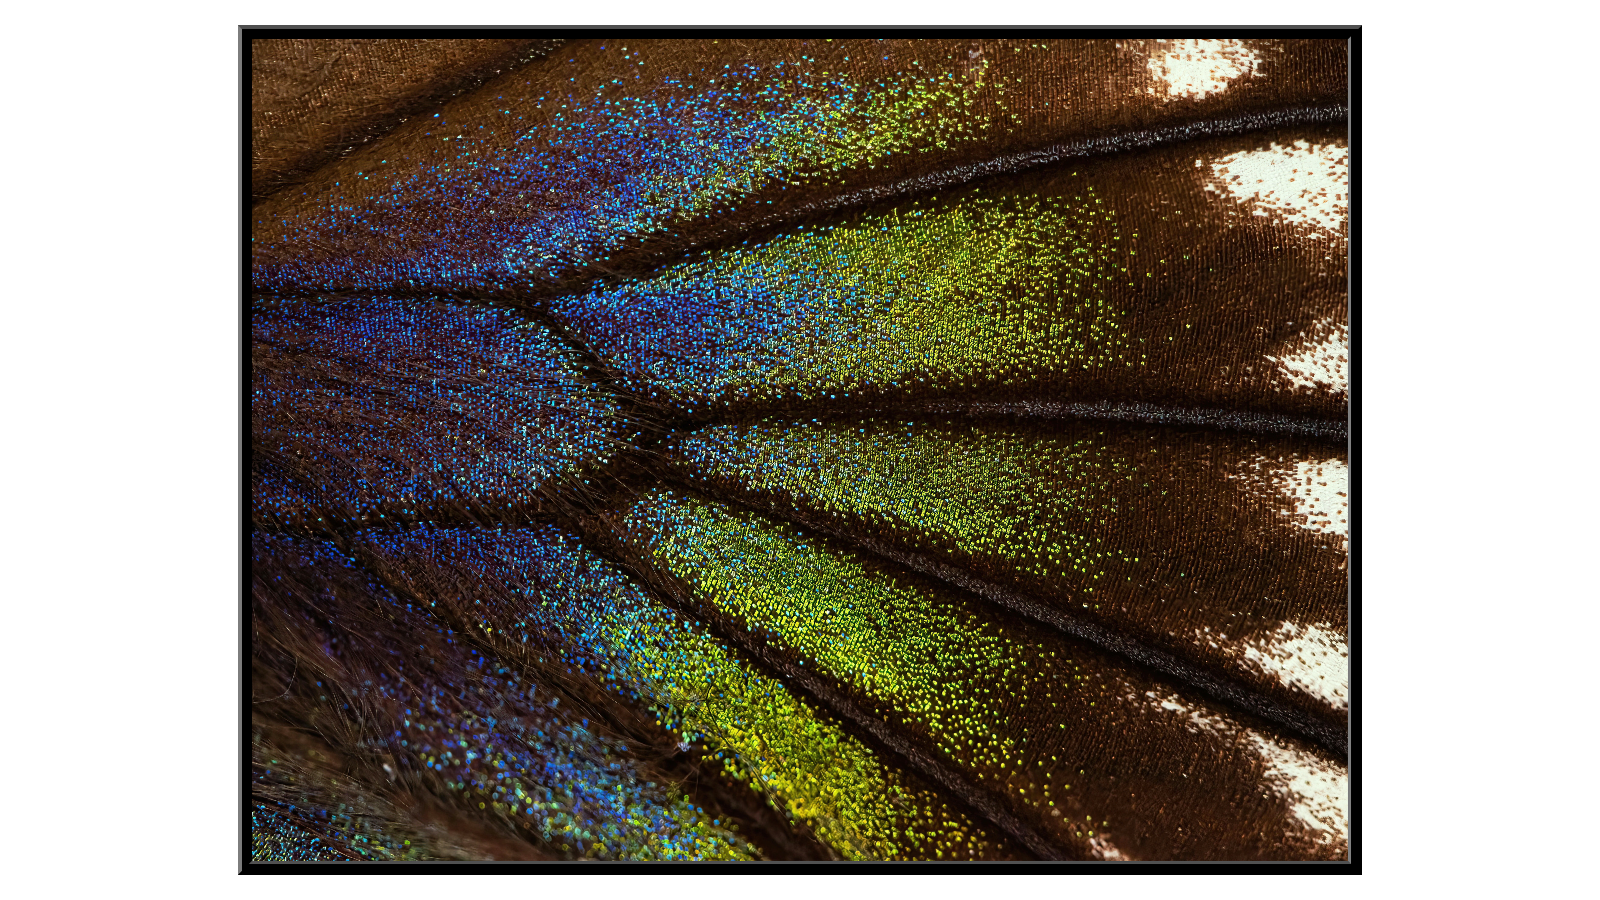 Colorful butterfly wing under the microscope